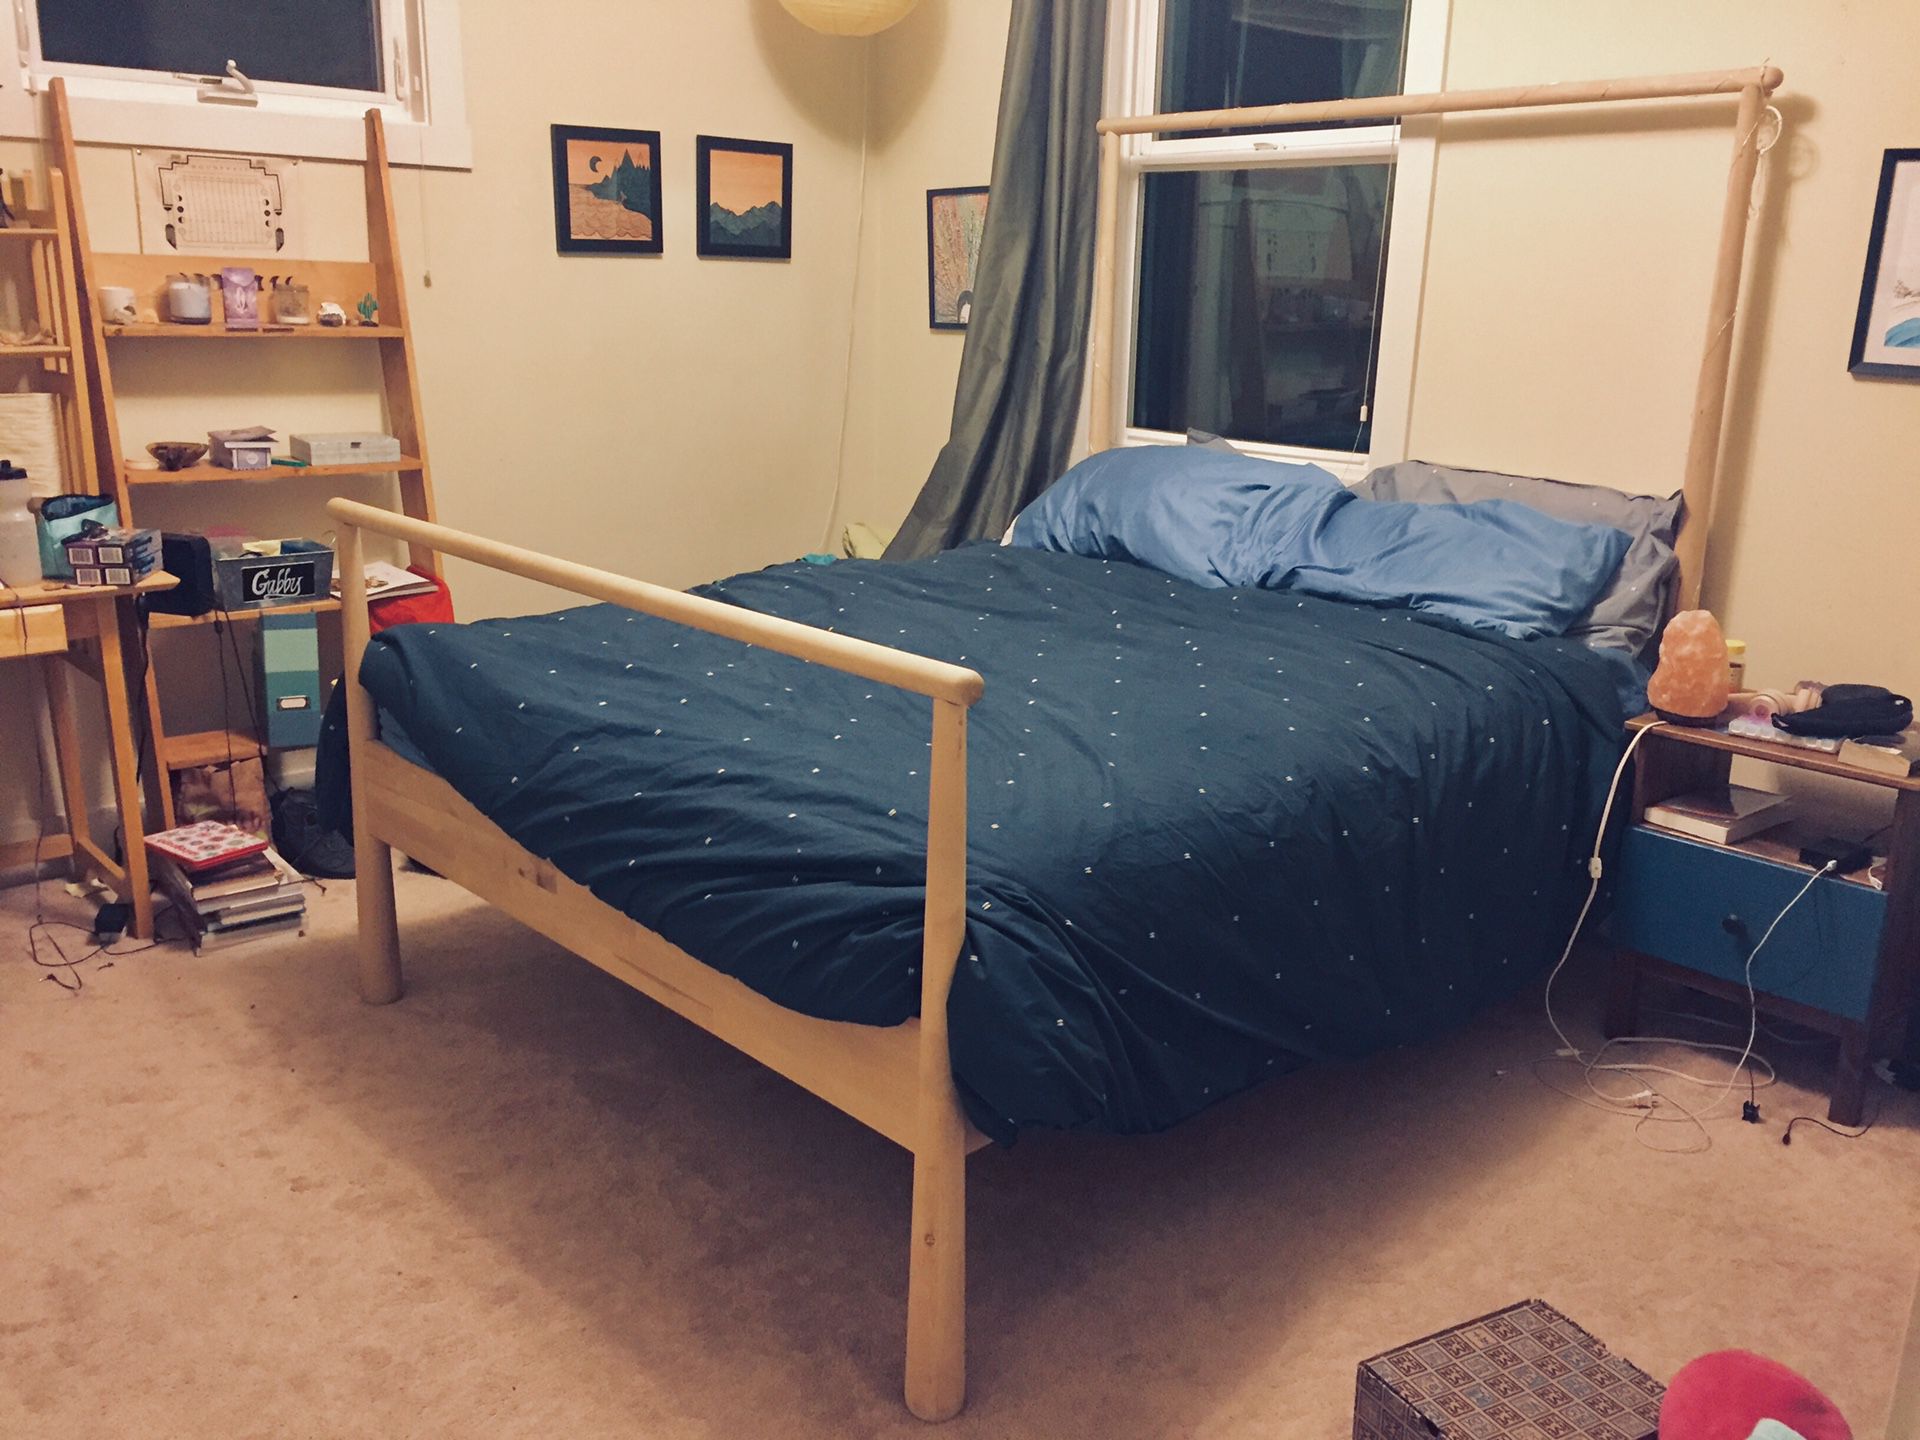 Magnificent used ikea bed frame Modern Queen Ikea Gjora Bed Frame For Sale In Seattle Wa Offerup